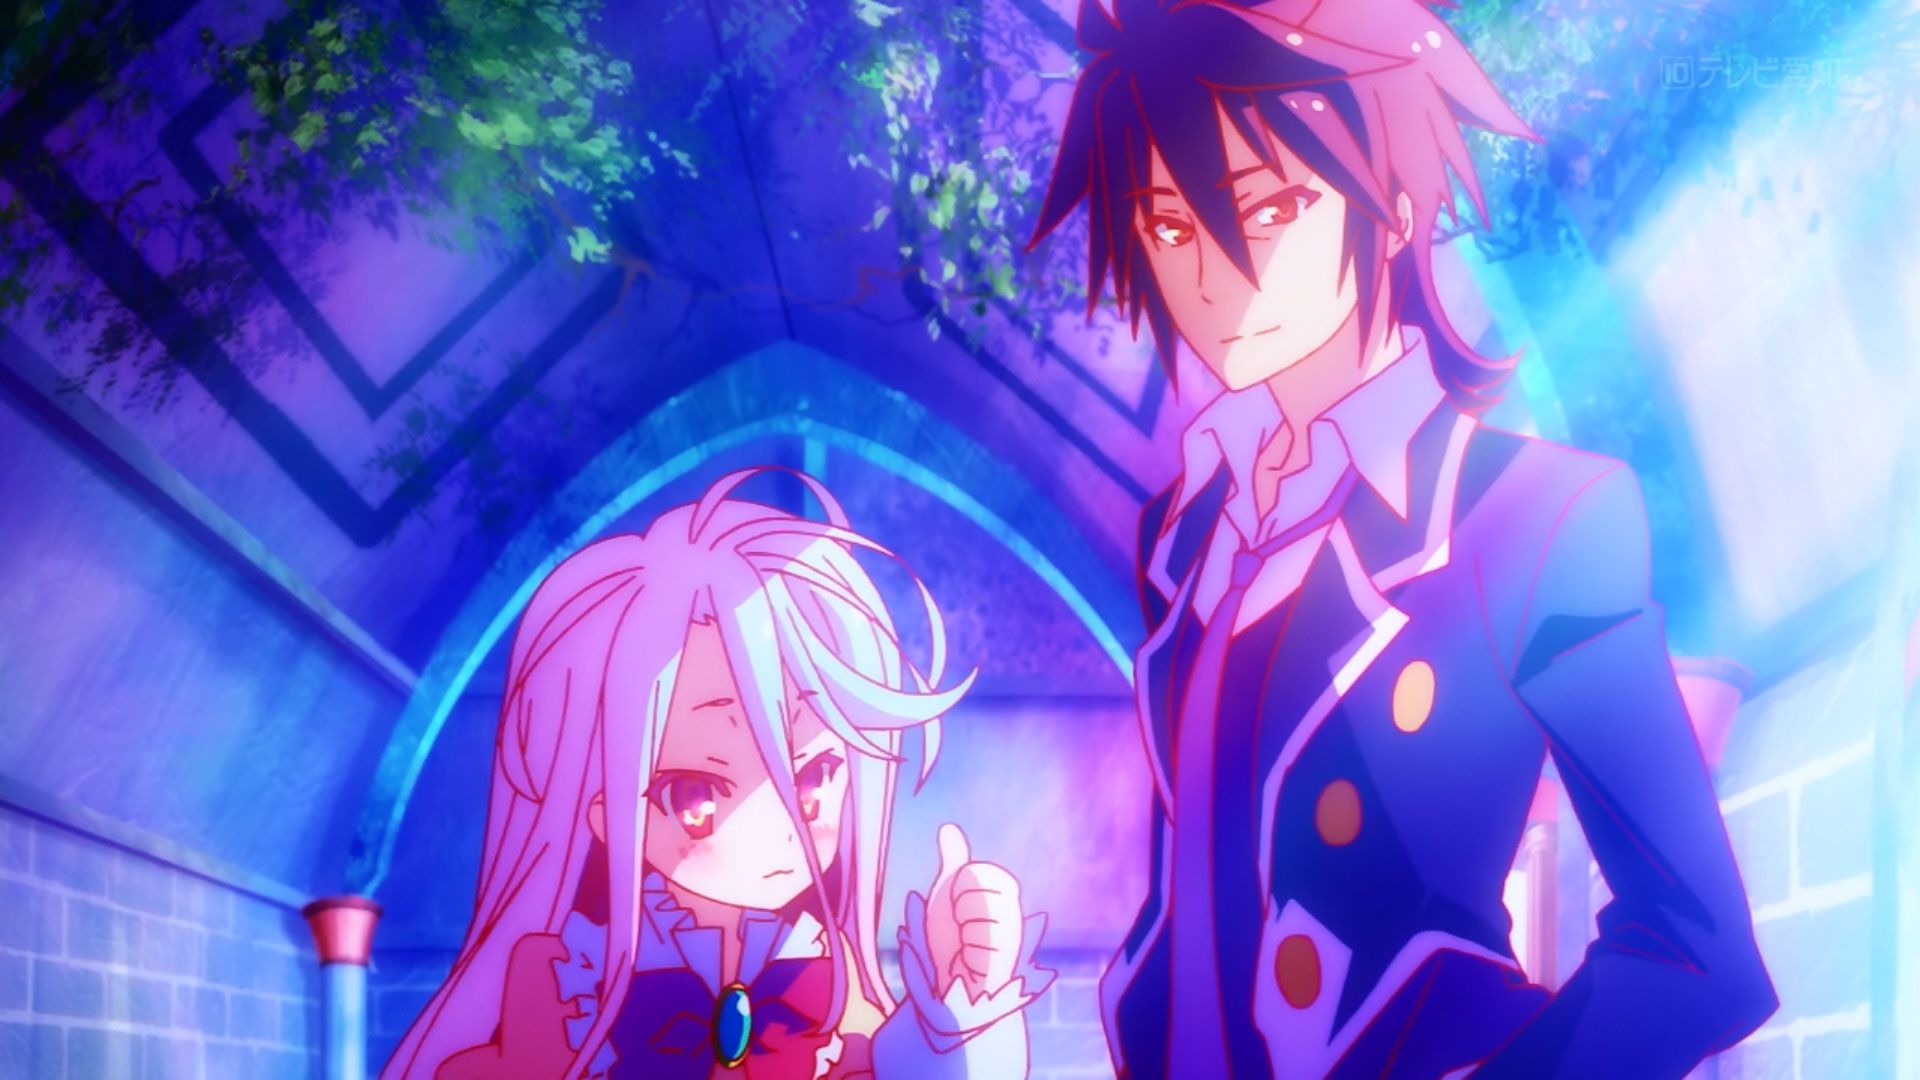 Fun Facts and Details About No Game No Life Season 2